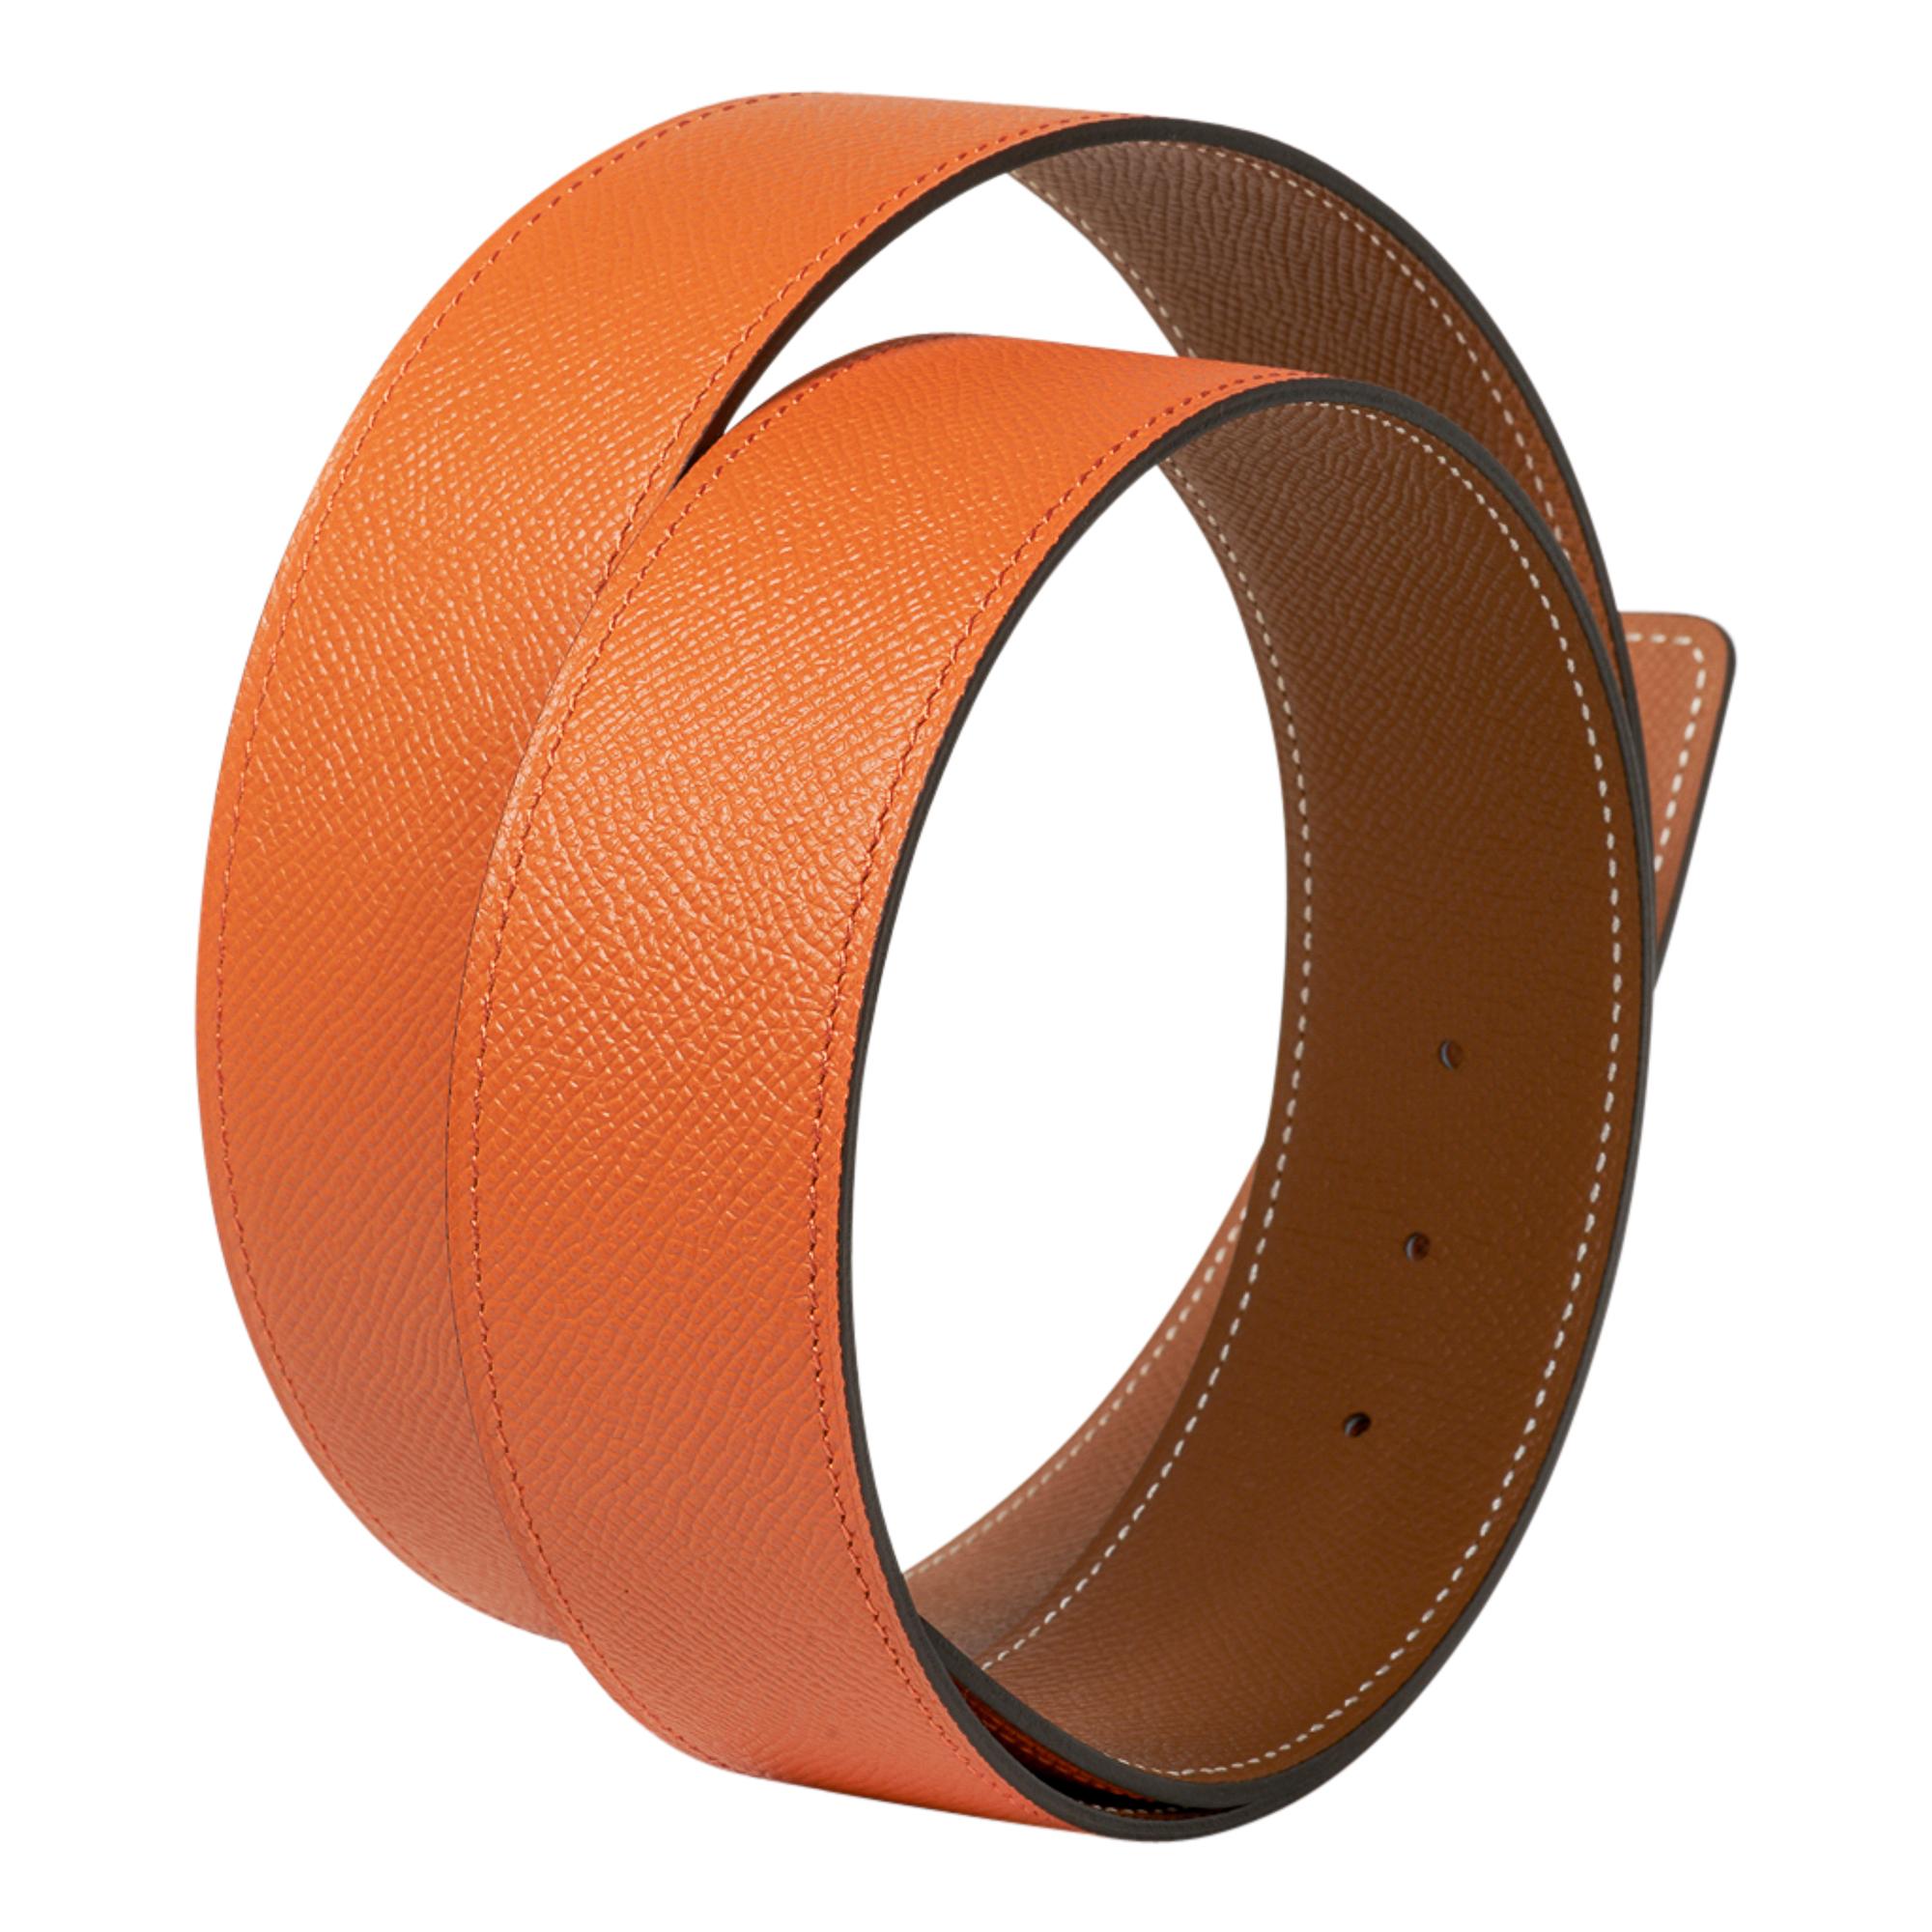 Guaranteed authentic Hermes Constance 42 mm belt features reversible Orange to Golde.  
Fabulous over sized brushed gold signature H buckle.  
The 42 mm now a retired size, this is sure to become a collectors treasure. 
Epsom leather.
Signature